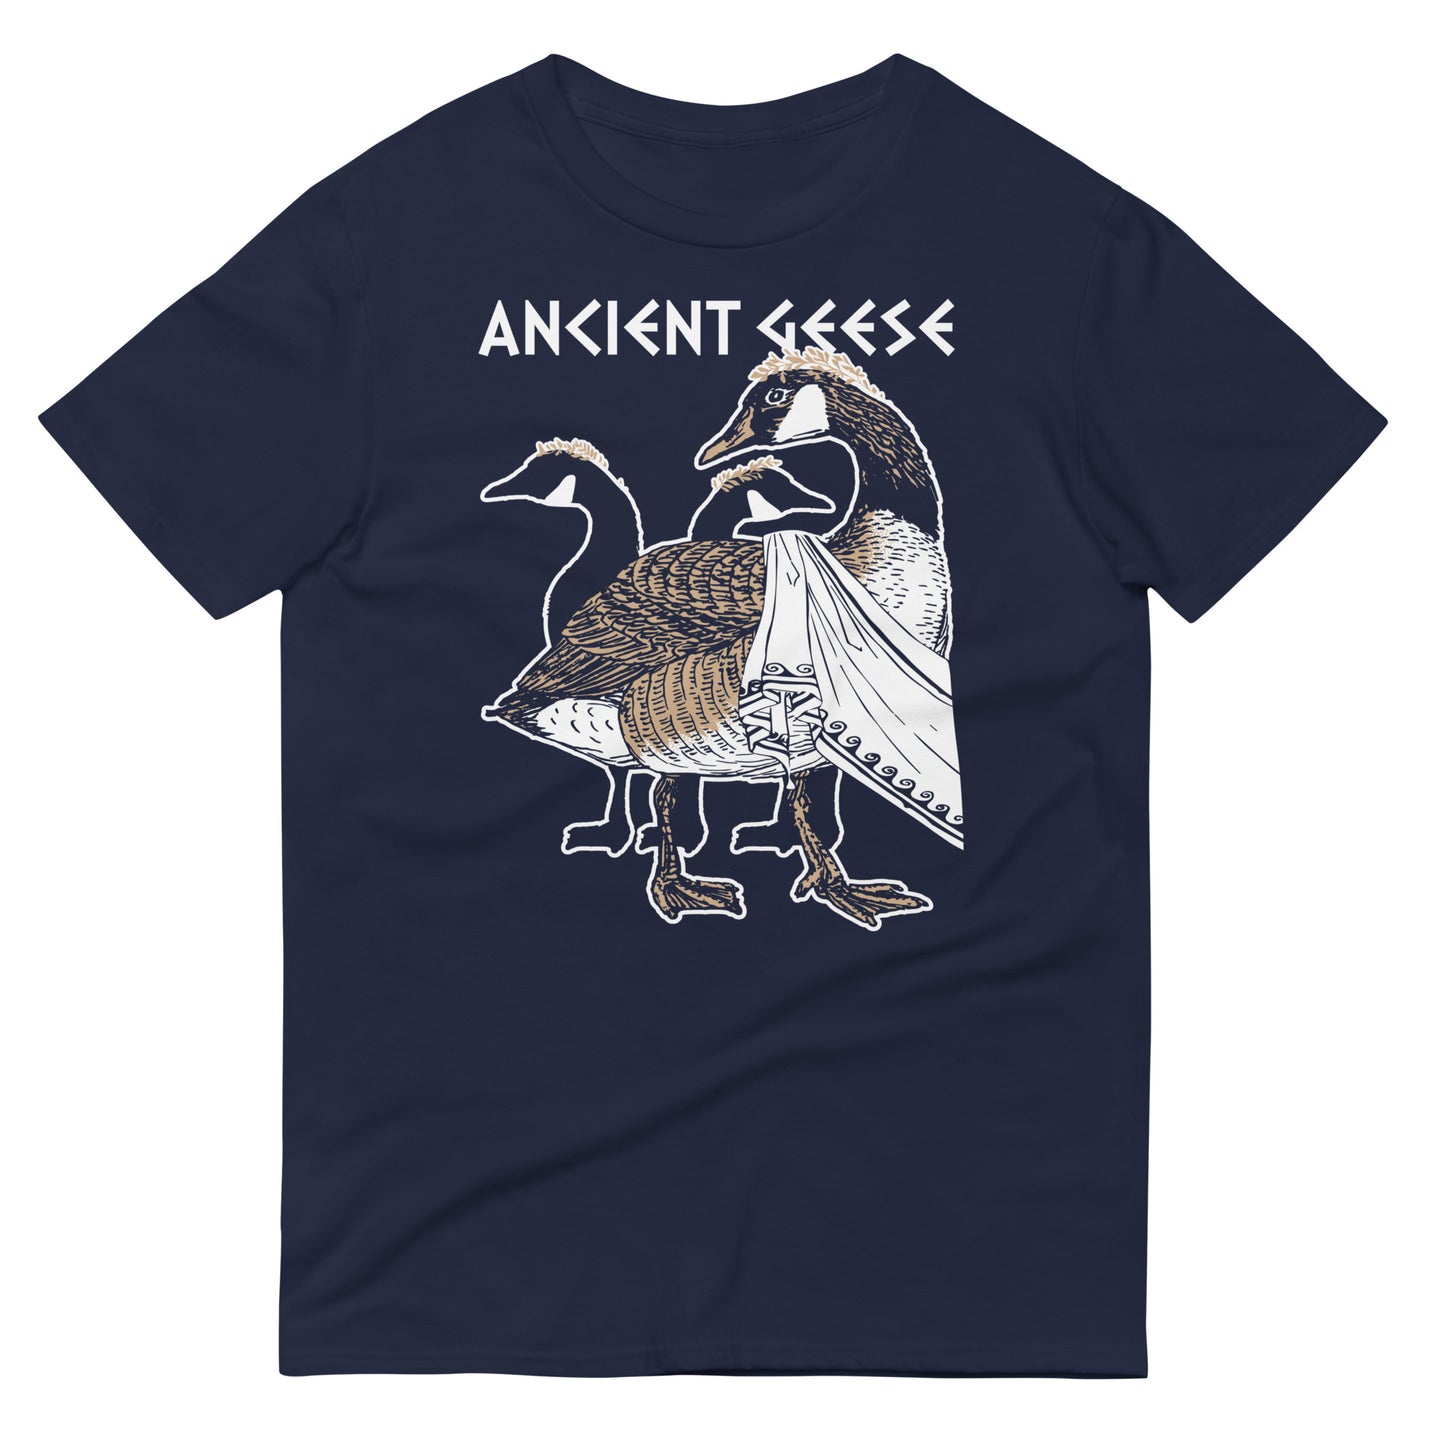 Ancient Geese Men's Signature Tee